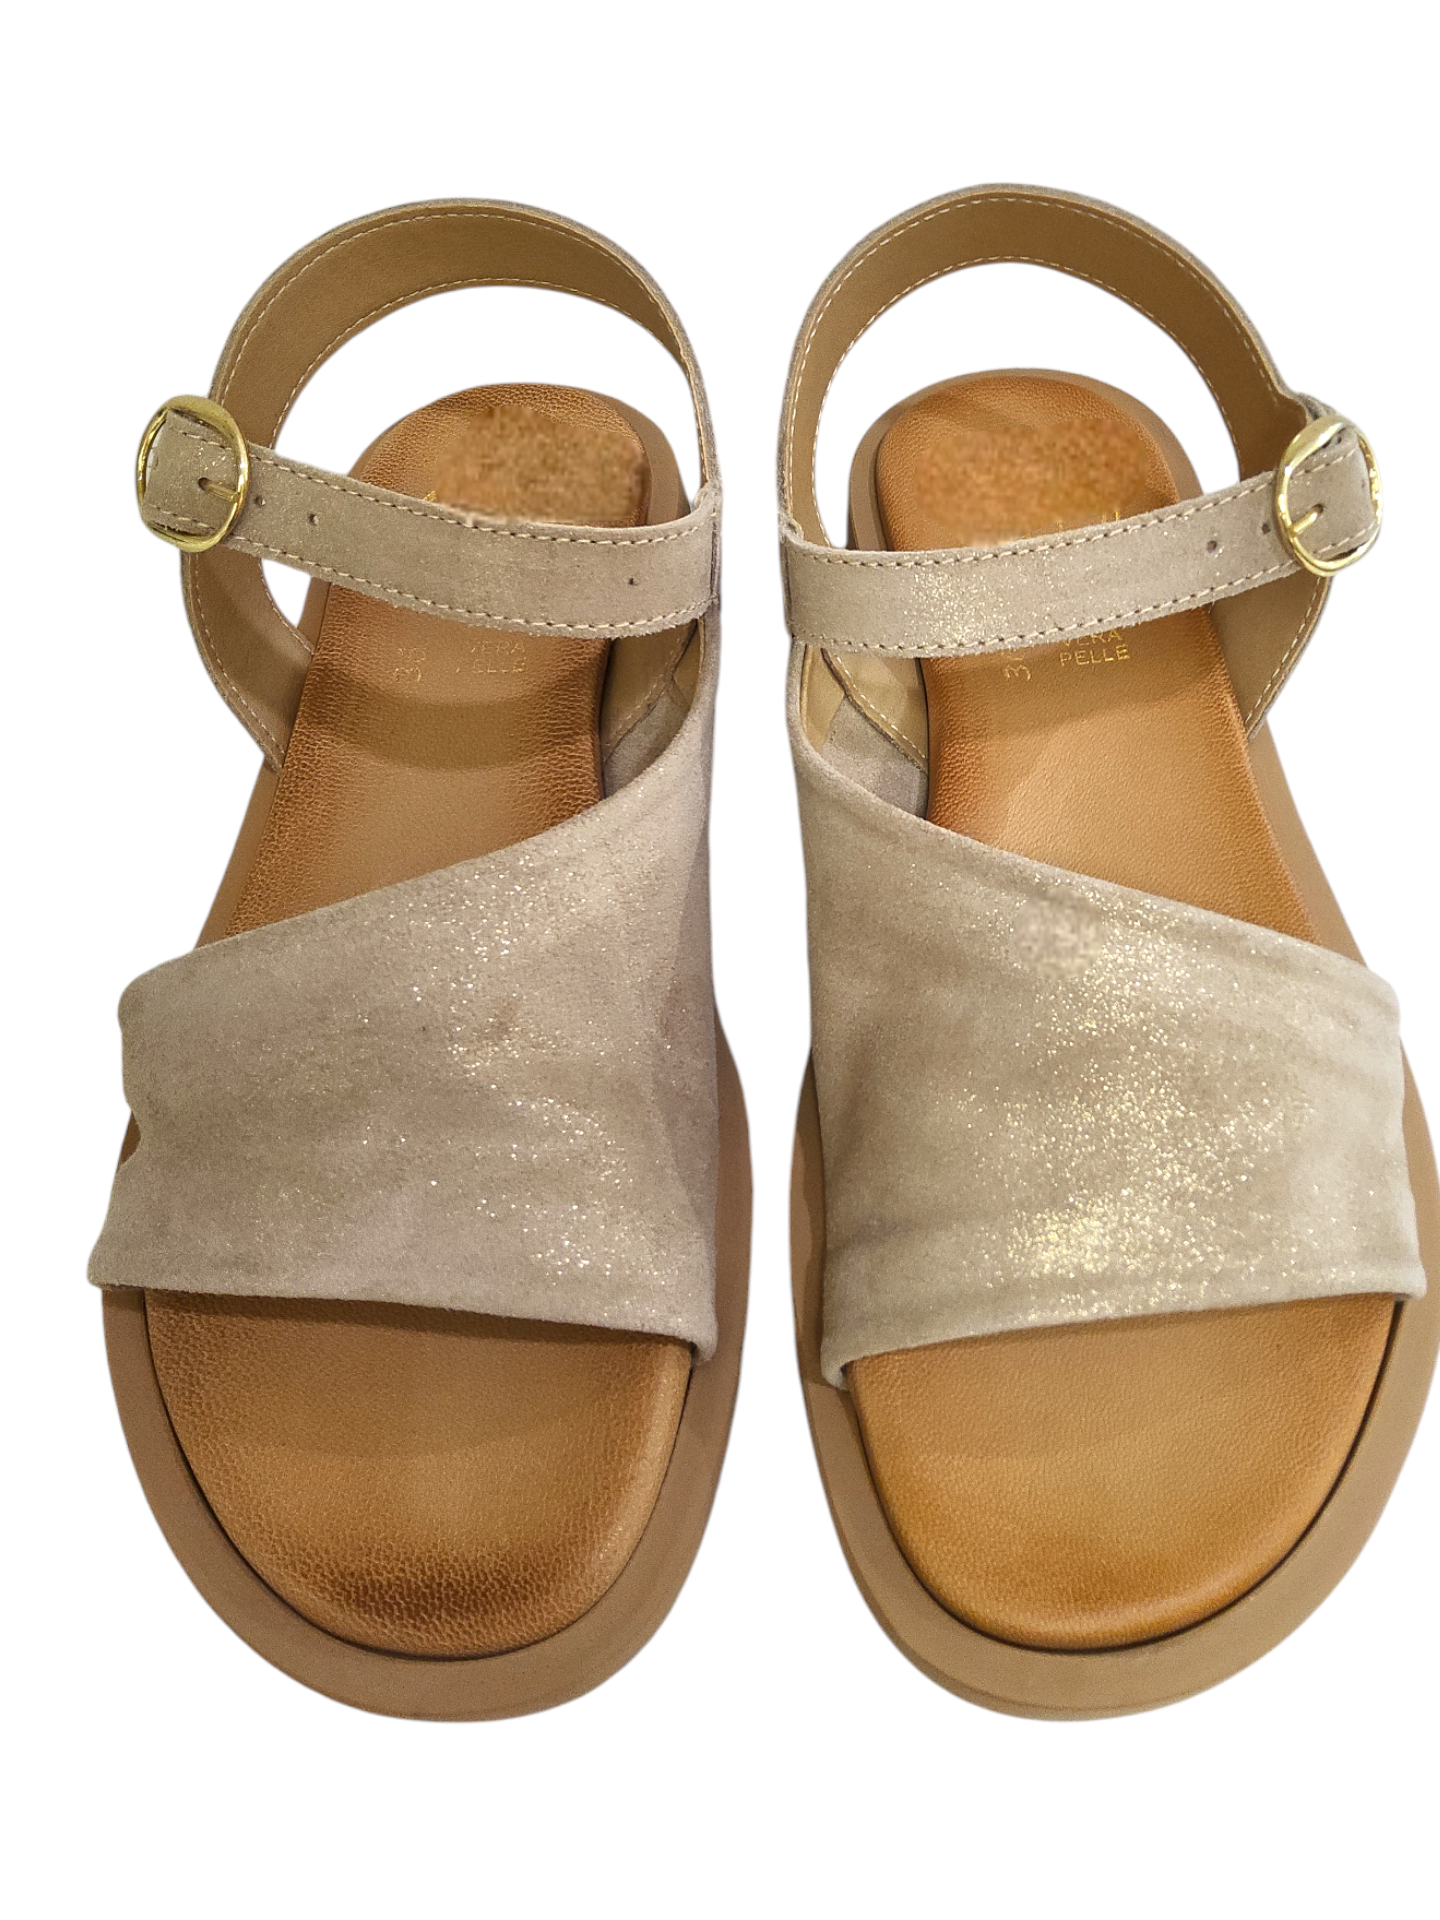 Beige suede leather sandals